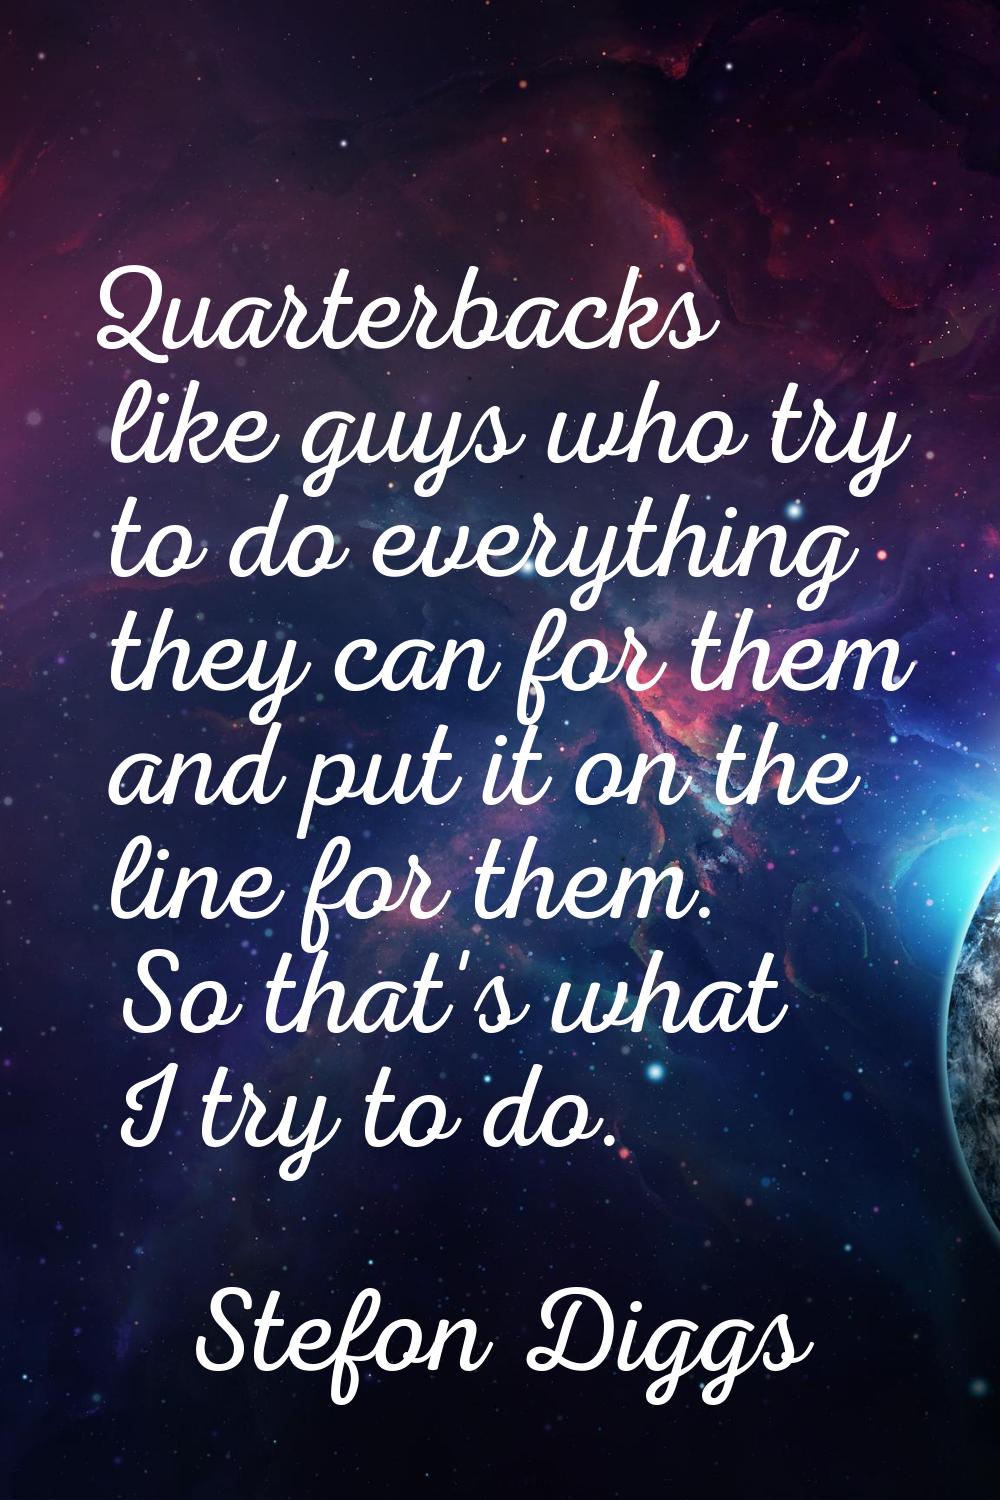 Quarterbacks like guys who try to do everything they can for them and put it on the line for them. 